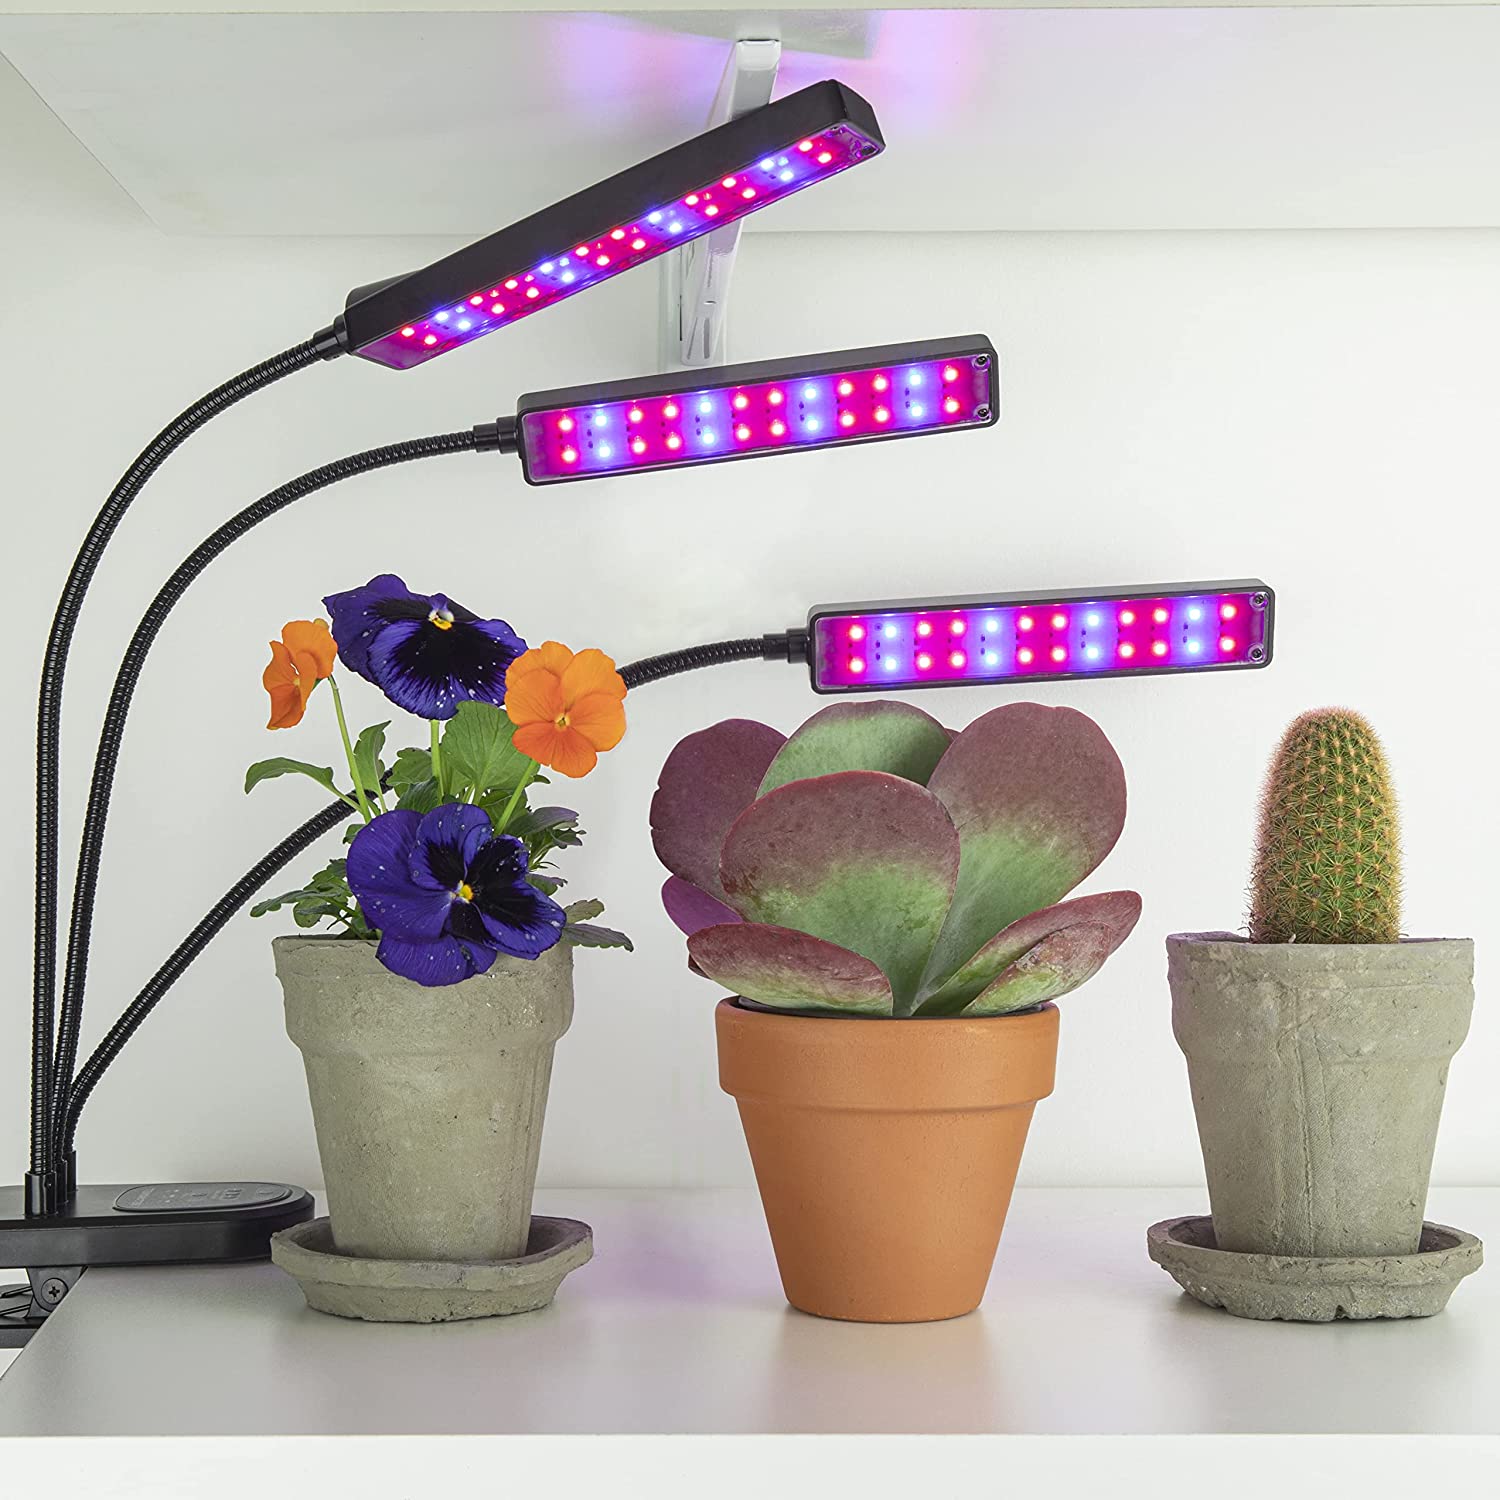 Bell and Howell Growburst Indoor Plant Growing Lamp EM8573